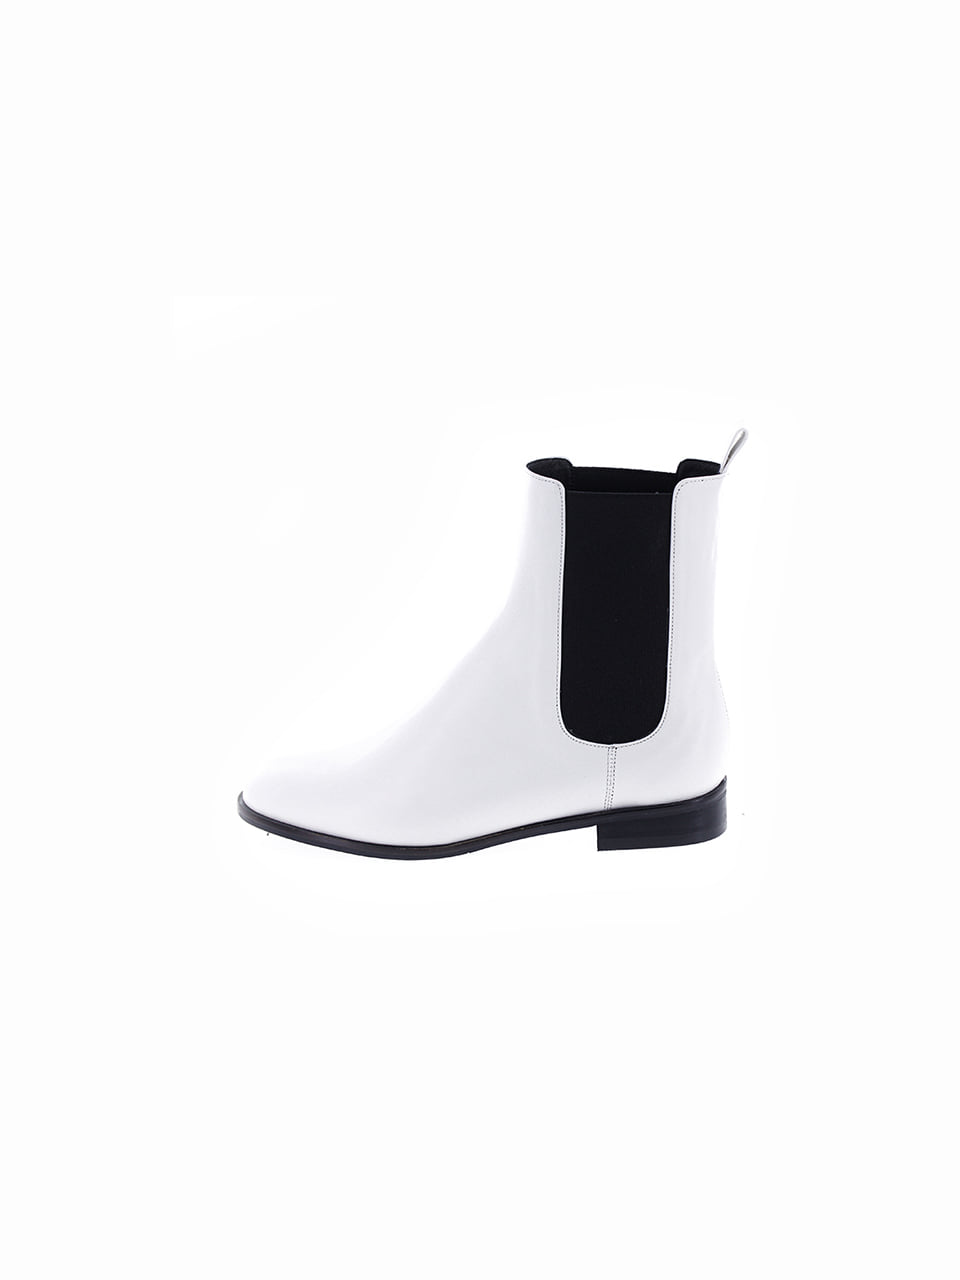 ROW middie boots_white